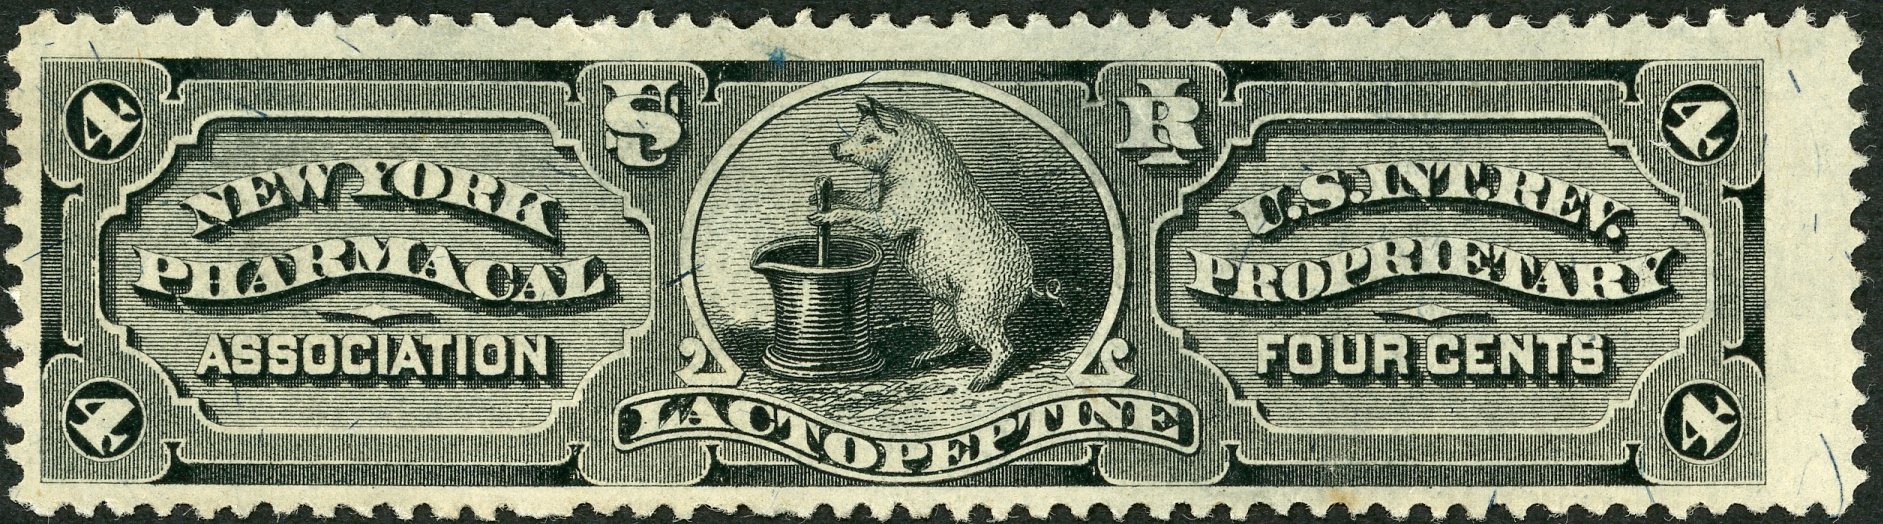 Scott number RS187b private die proprietary stamp advertising New York Pharmacal Association's Lactopeptine